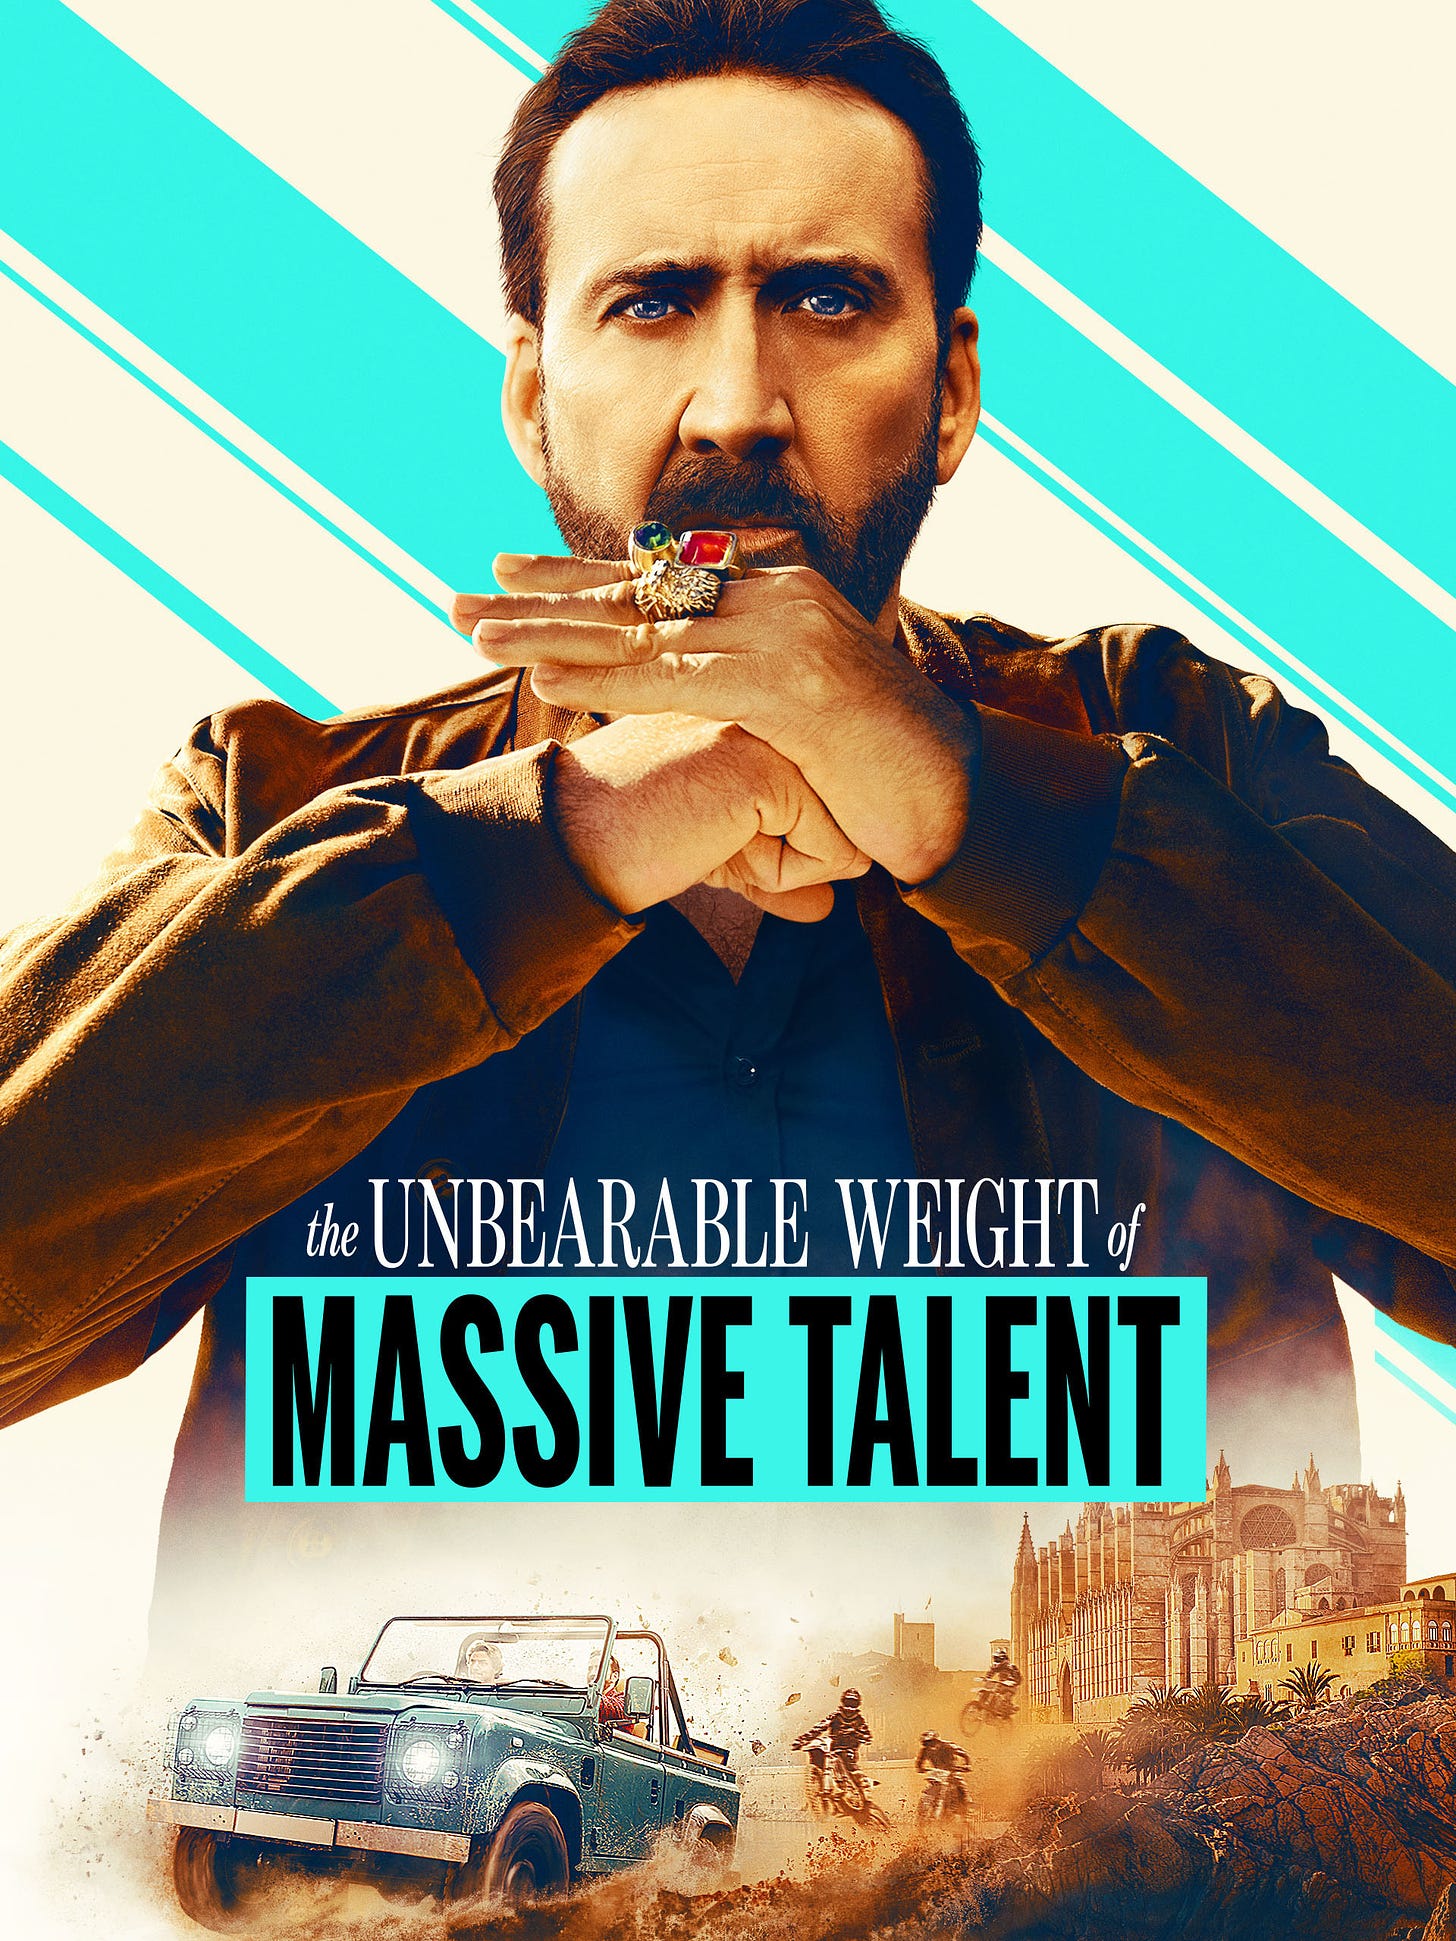 Prime Video: The Unbearable Weight of Massive Talent